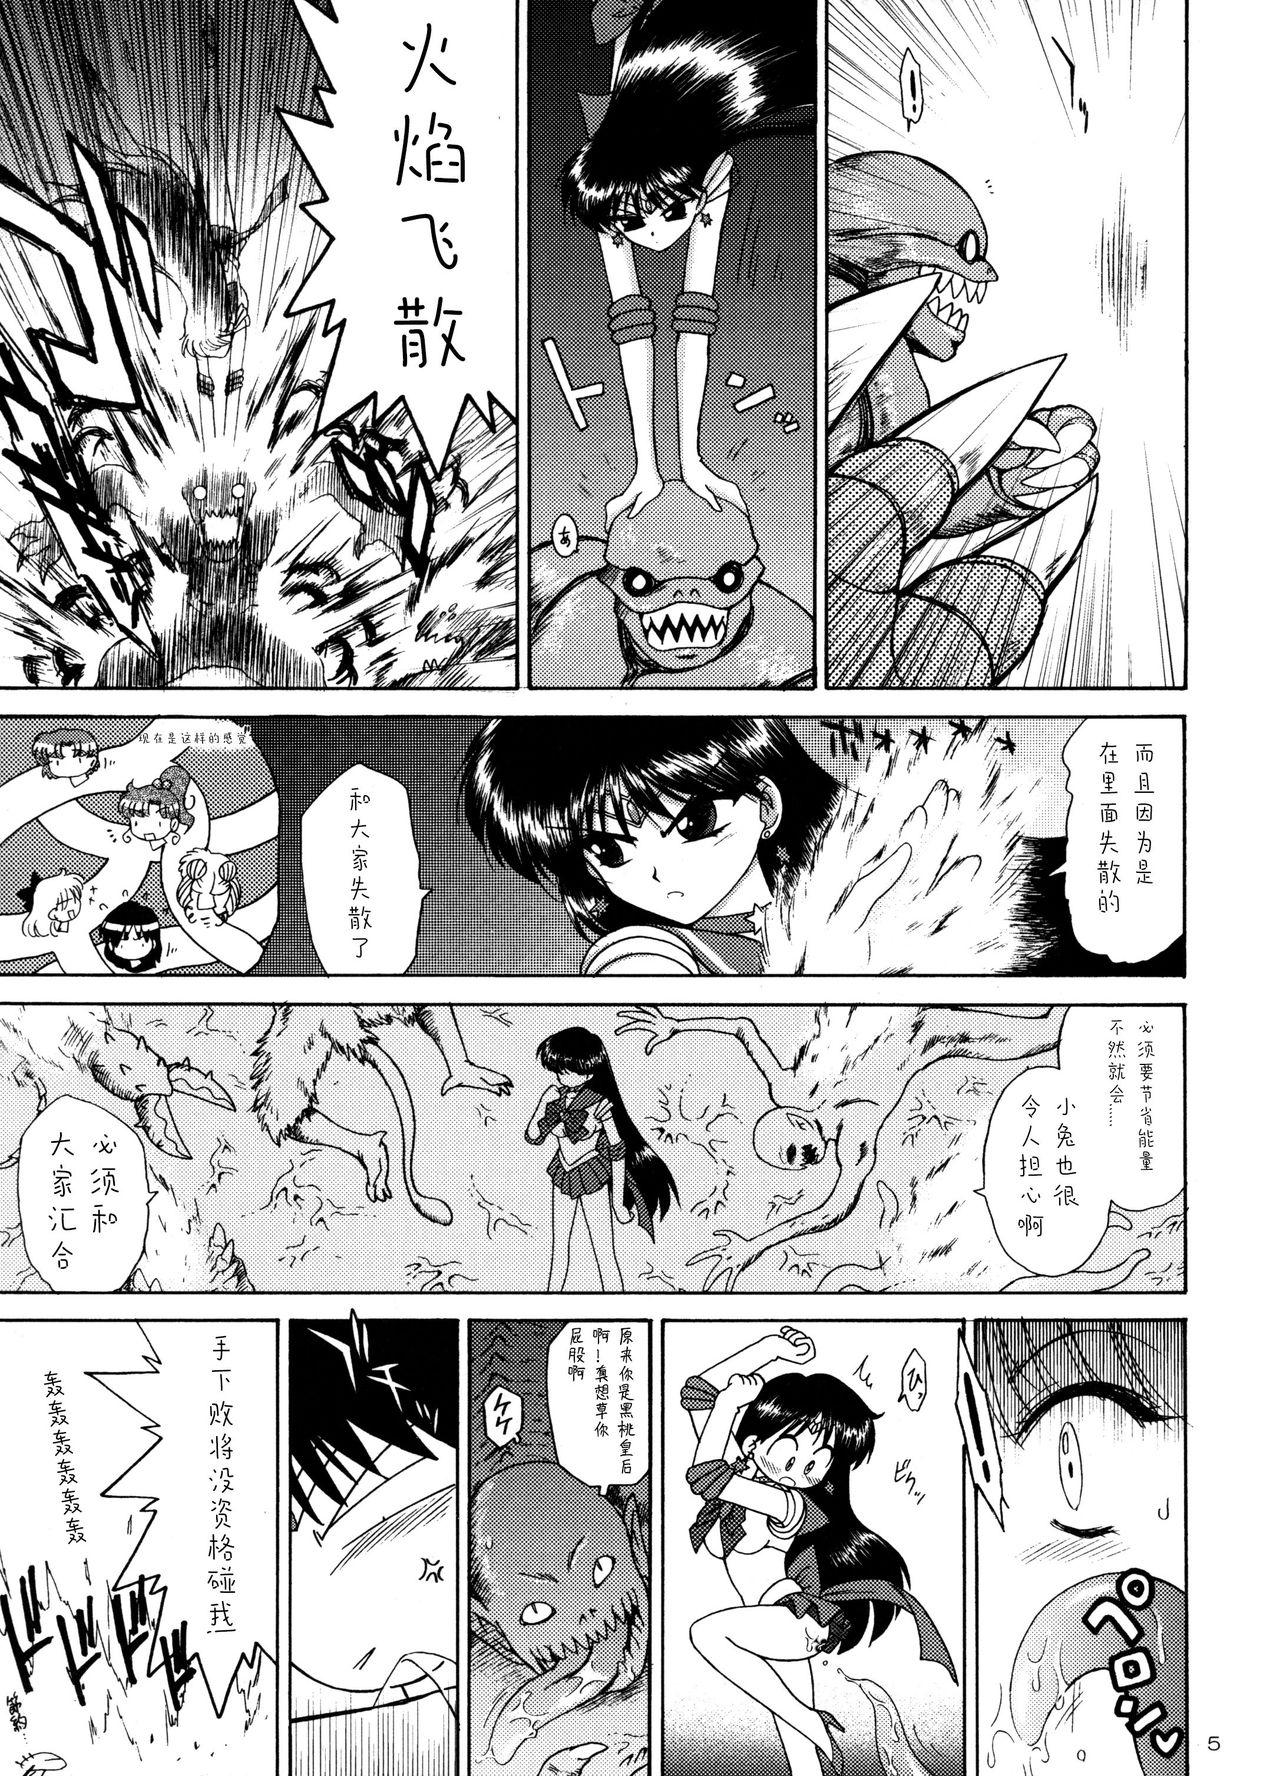 Fucking Pussy QUEEN OF SPADES - 黑桃皇后 - Sailor moon Hardsex - Page 8